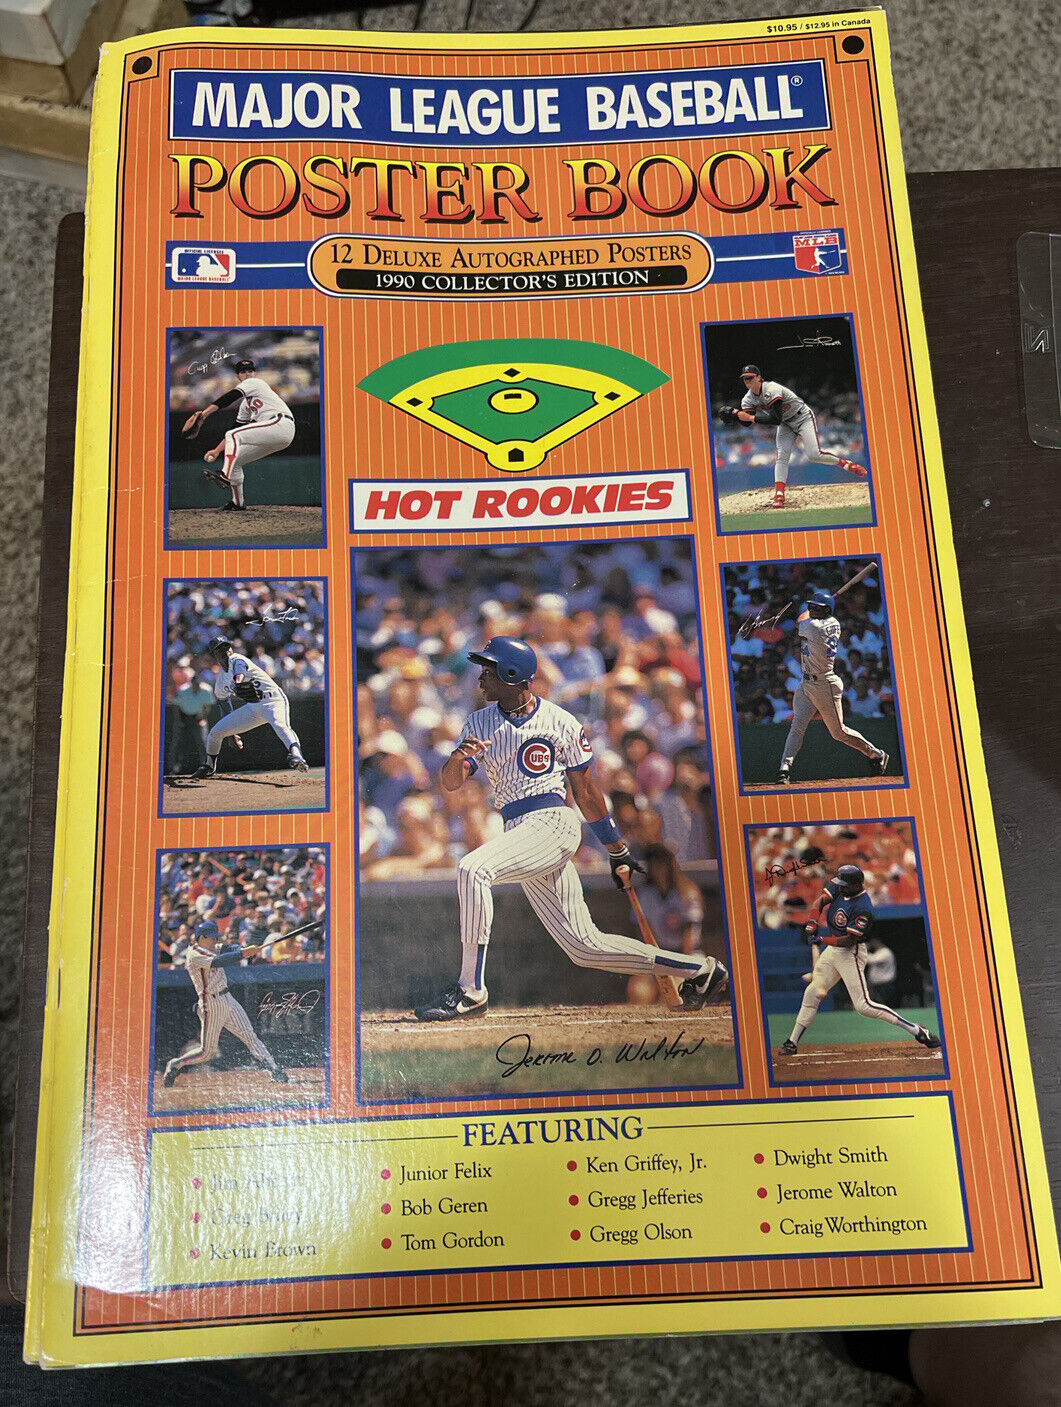 1990 MLB poster book autographed photos - Hot Rookies